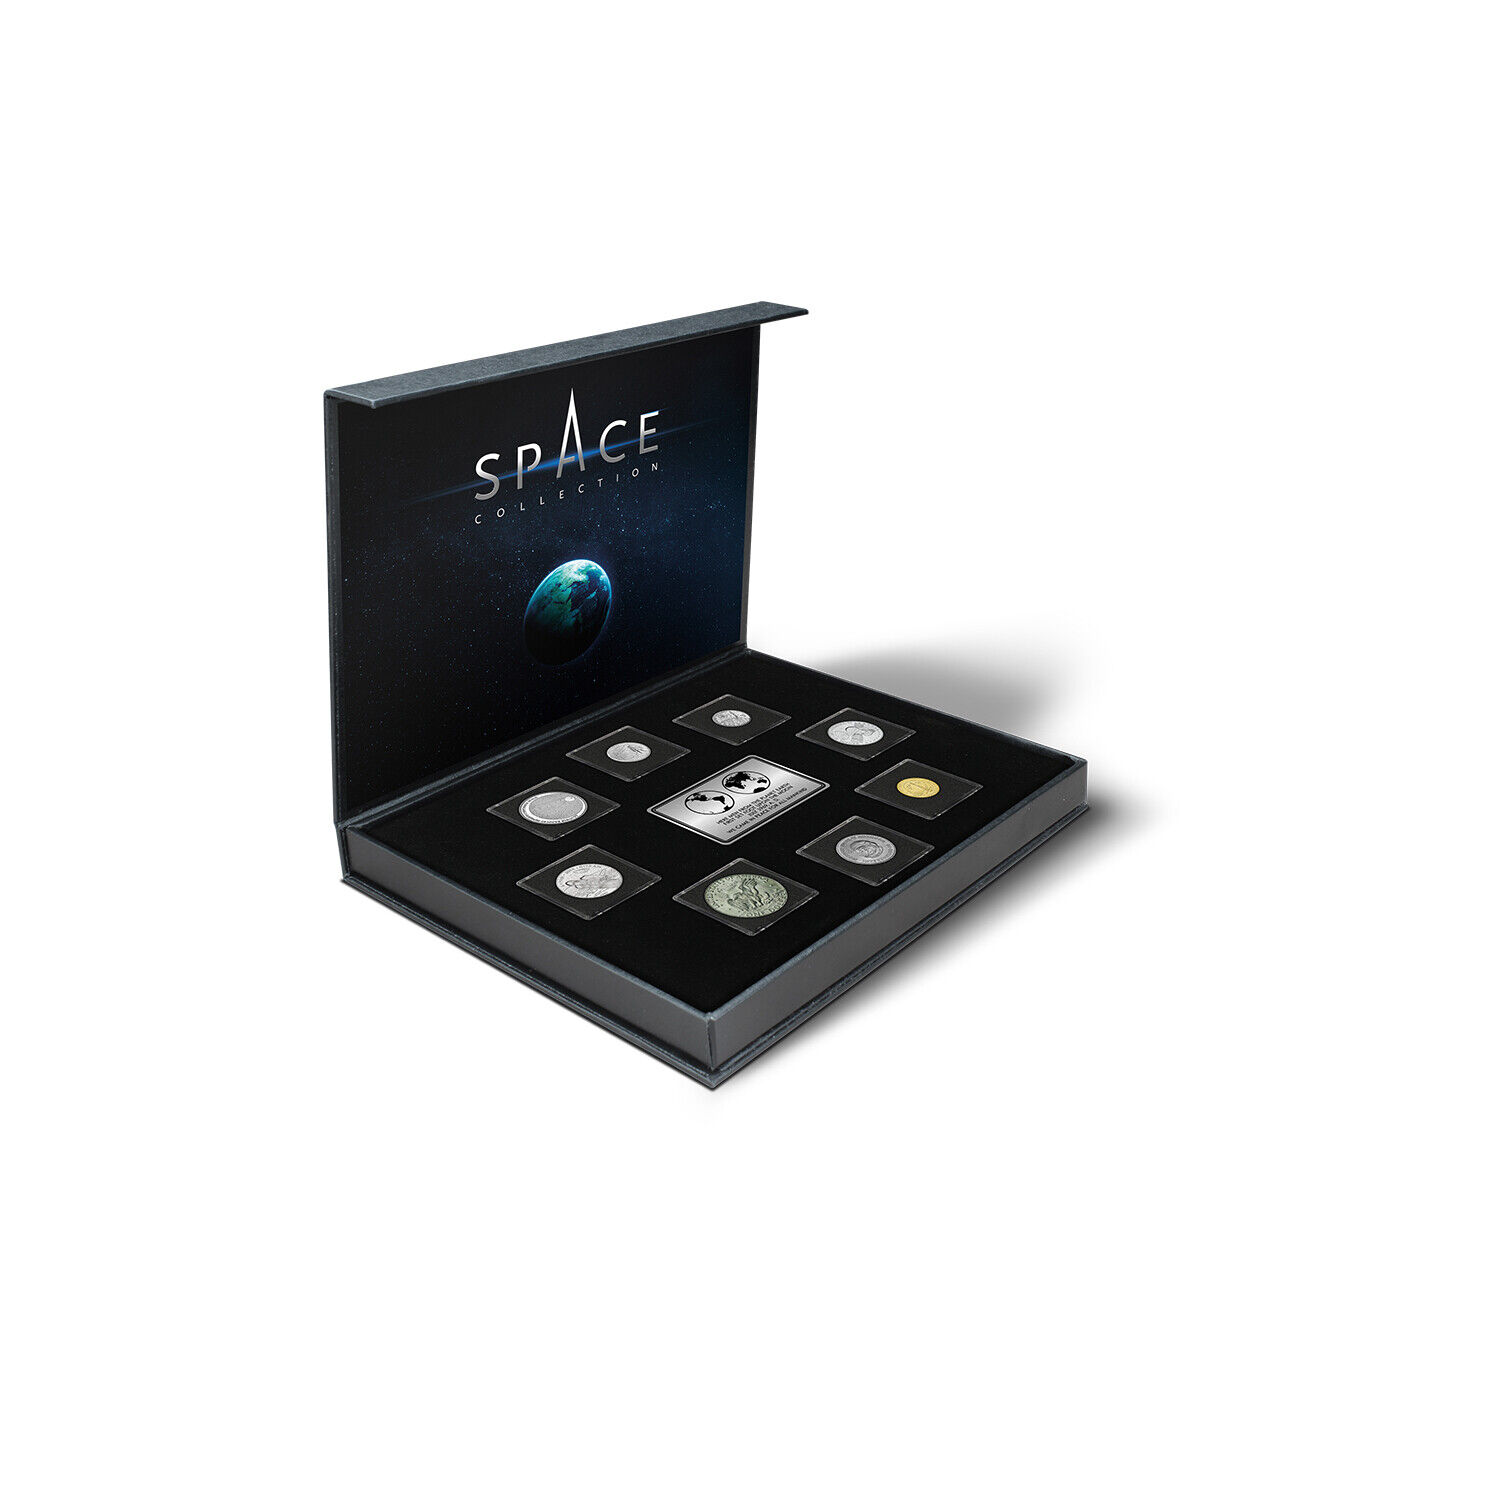 The Space Collection Coin Set